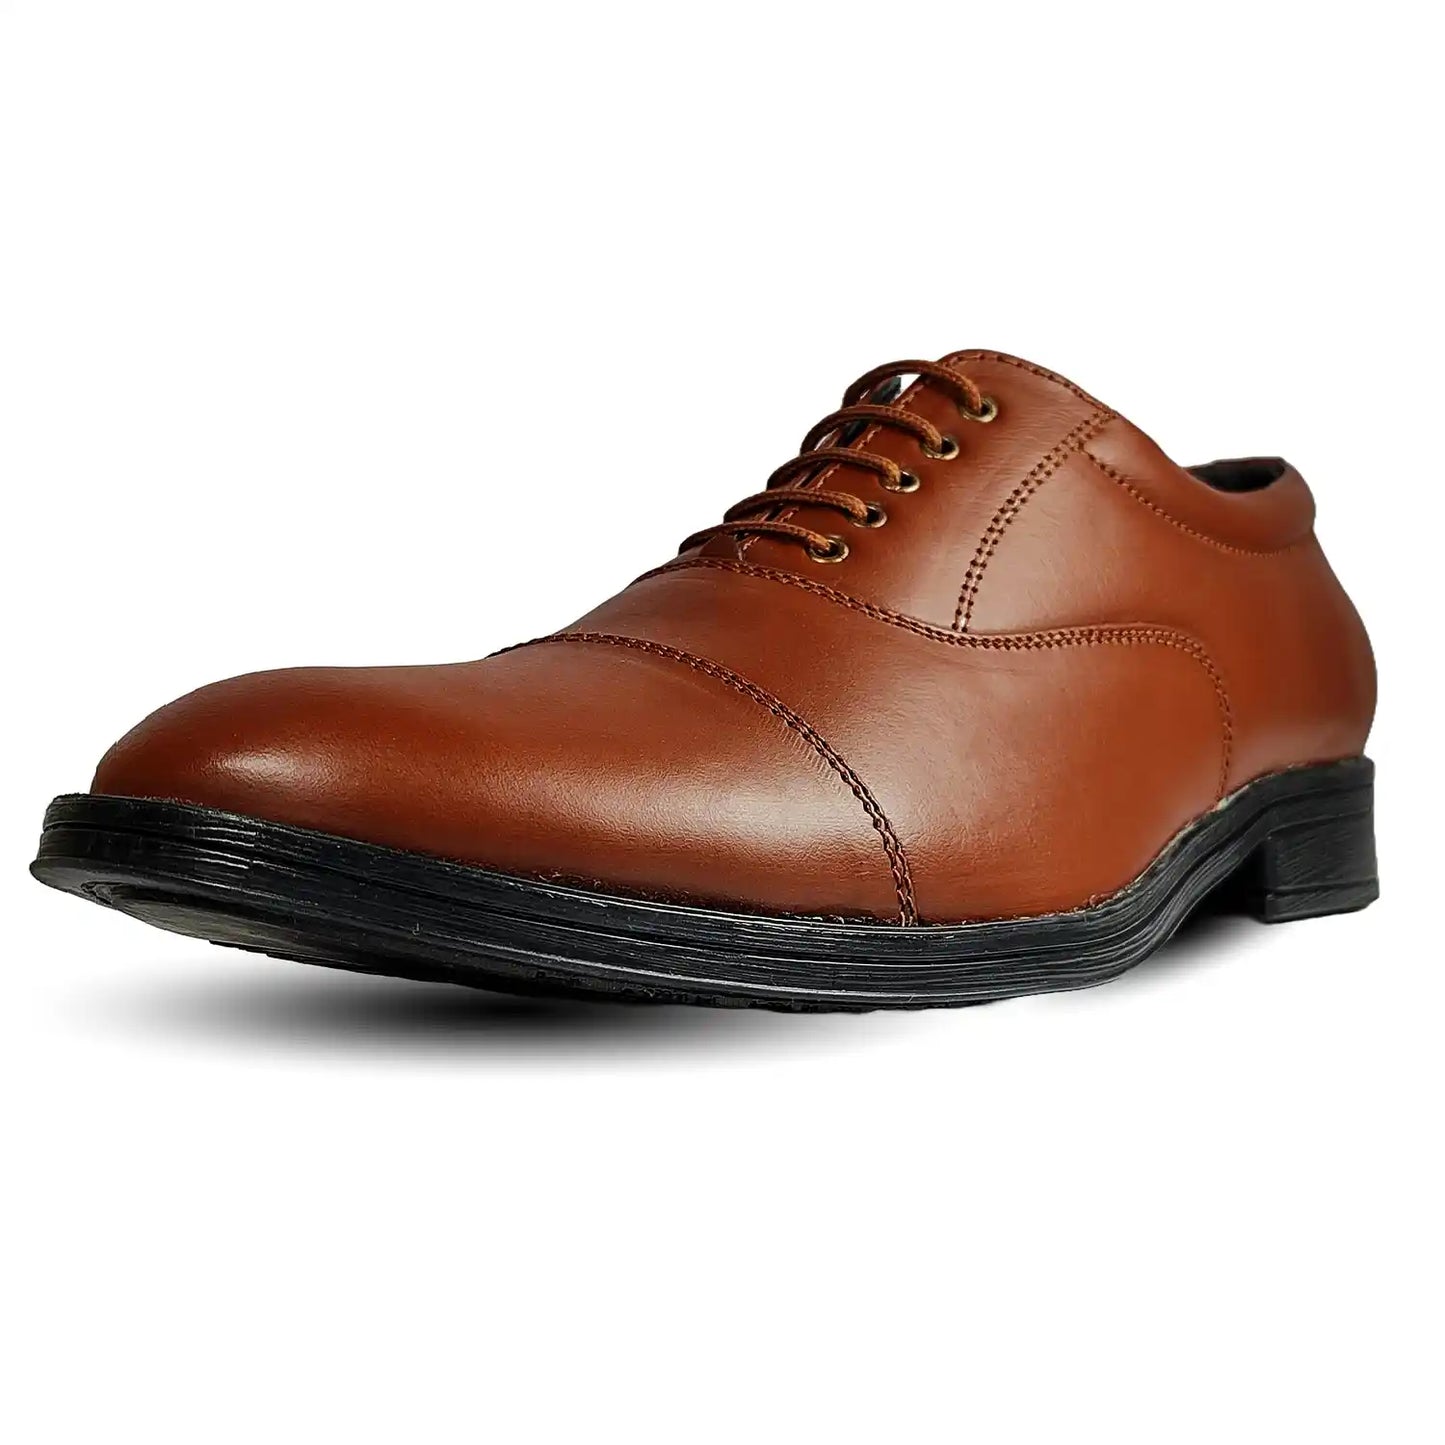 Police Uniform Shoes Pure Leather Oxford for Men